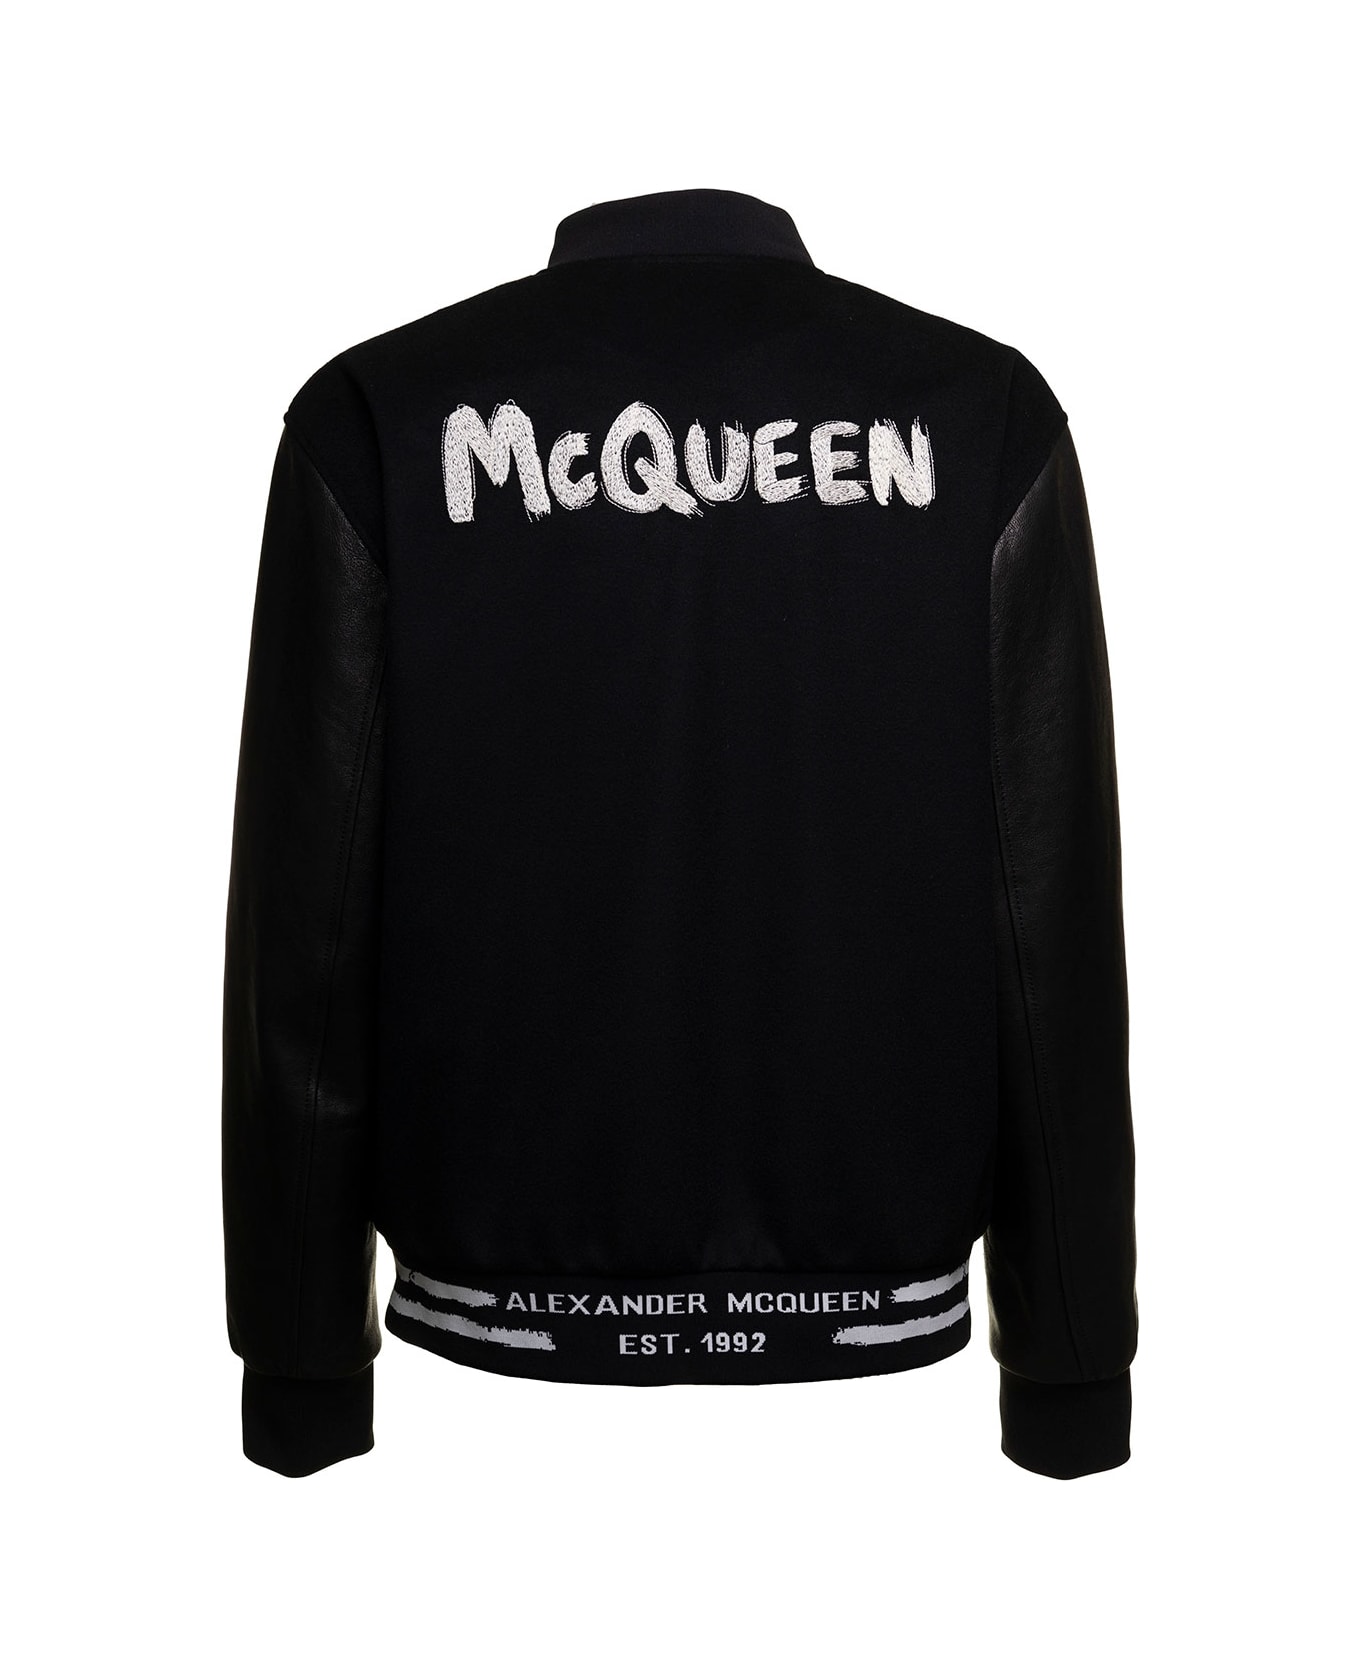 Alexander McQueen Man's Black Bomber Wool And Leather Jacket - BLACK